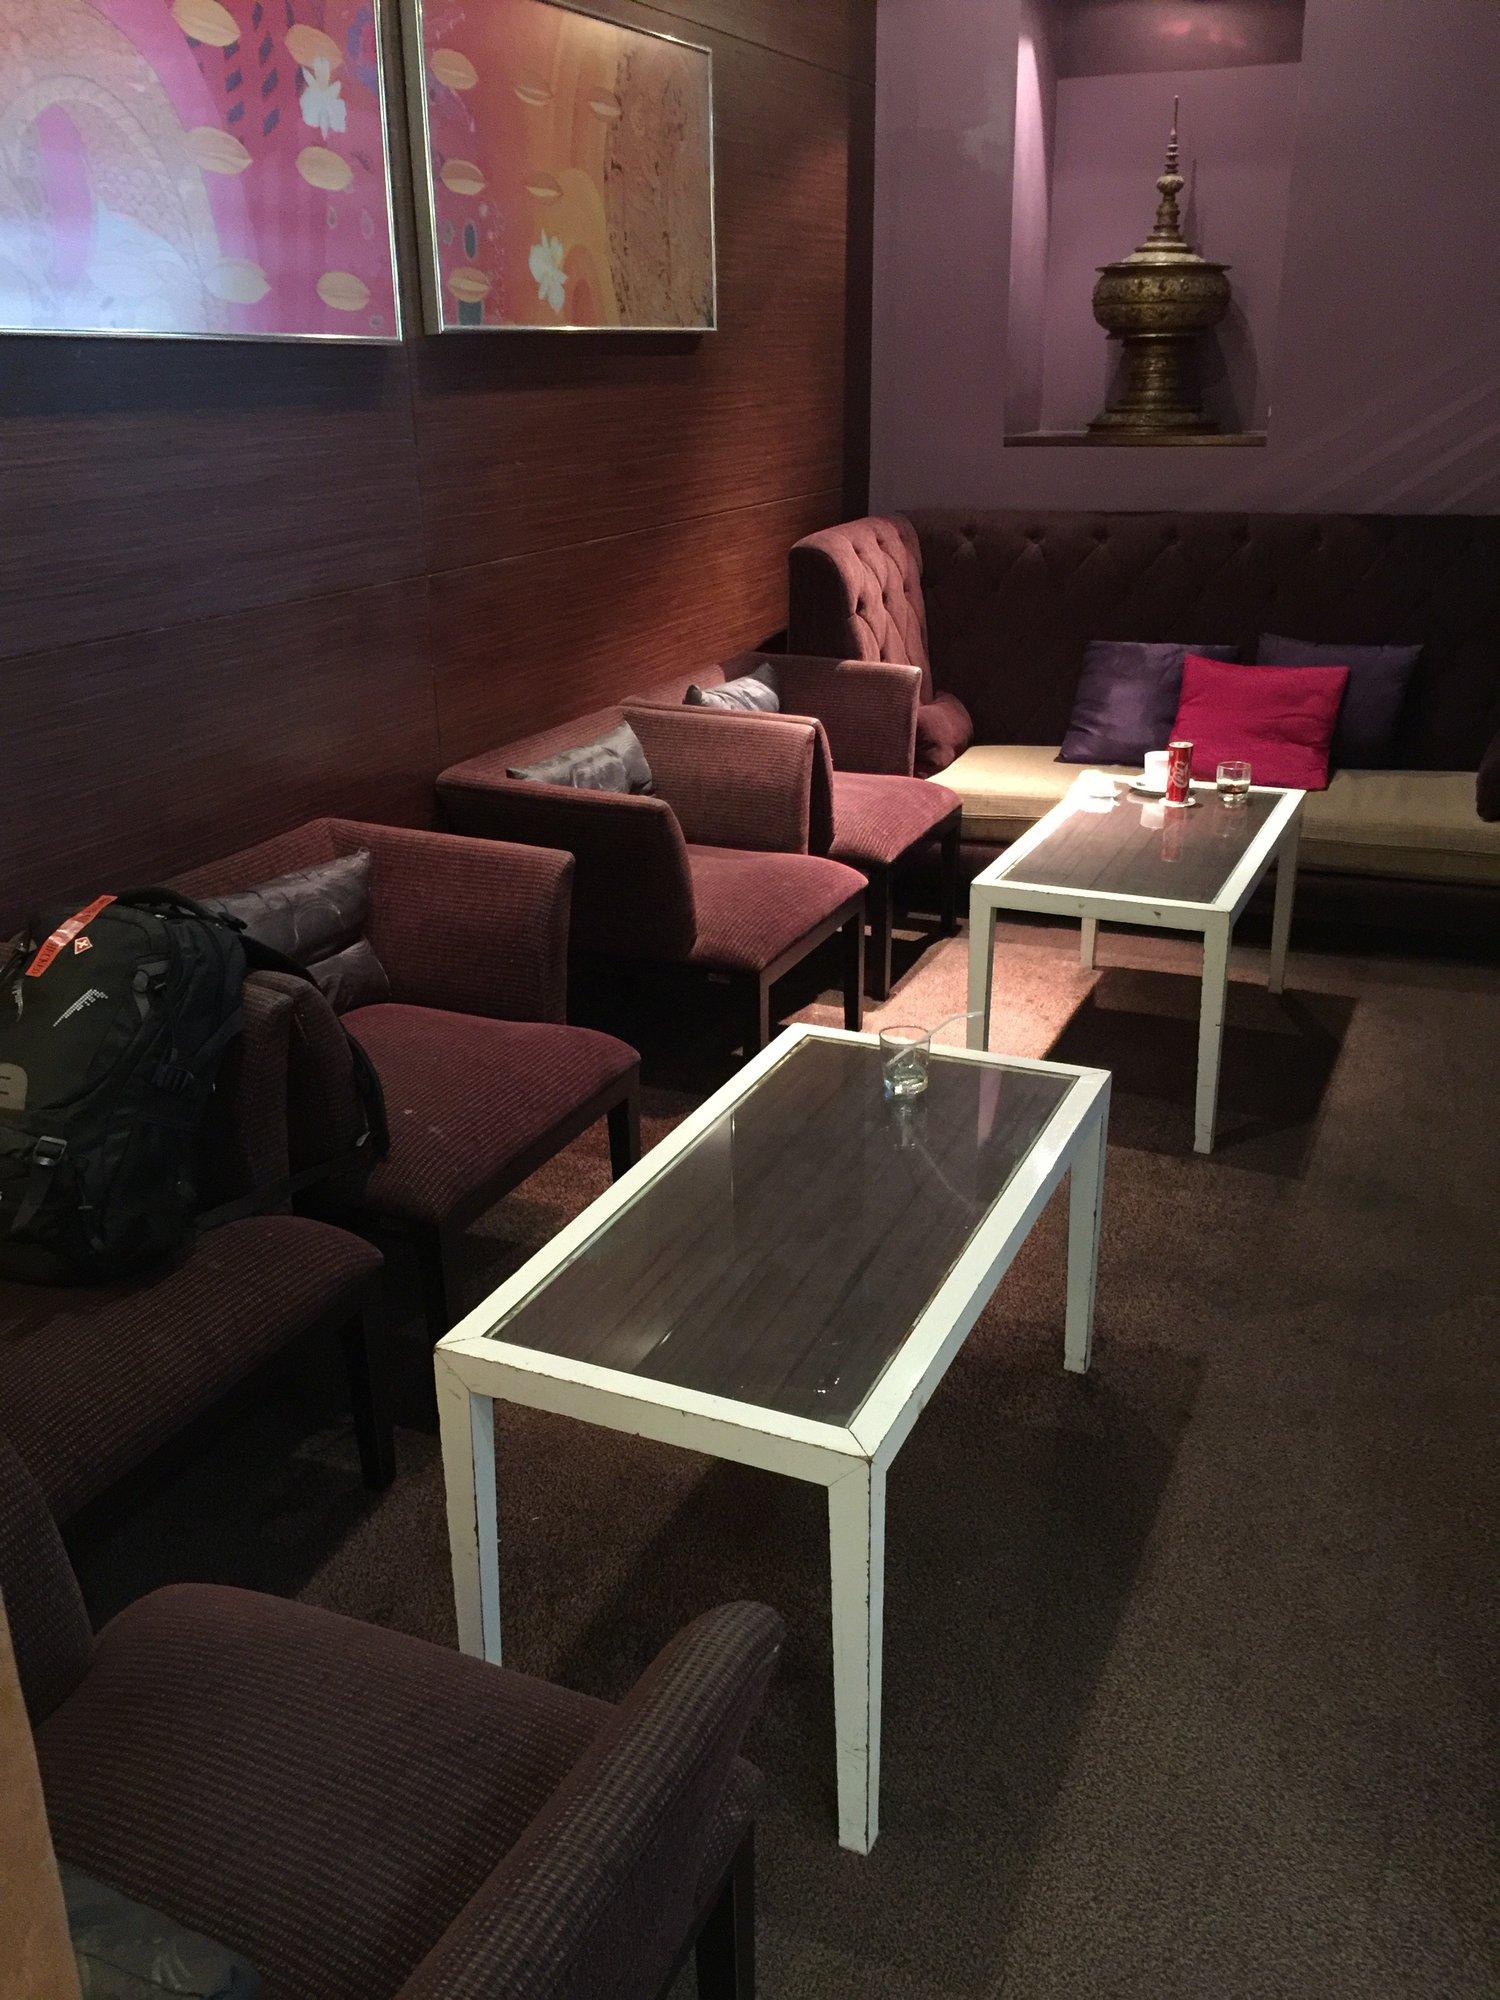 Thai Airways Royal Orchid Lounge image 9 of 22